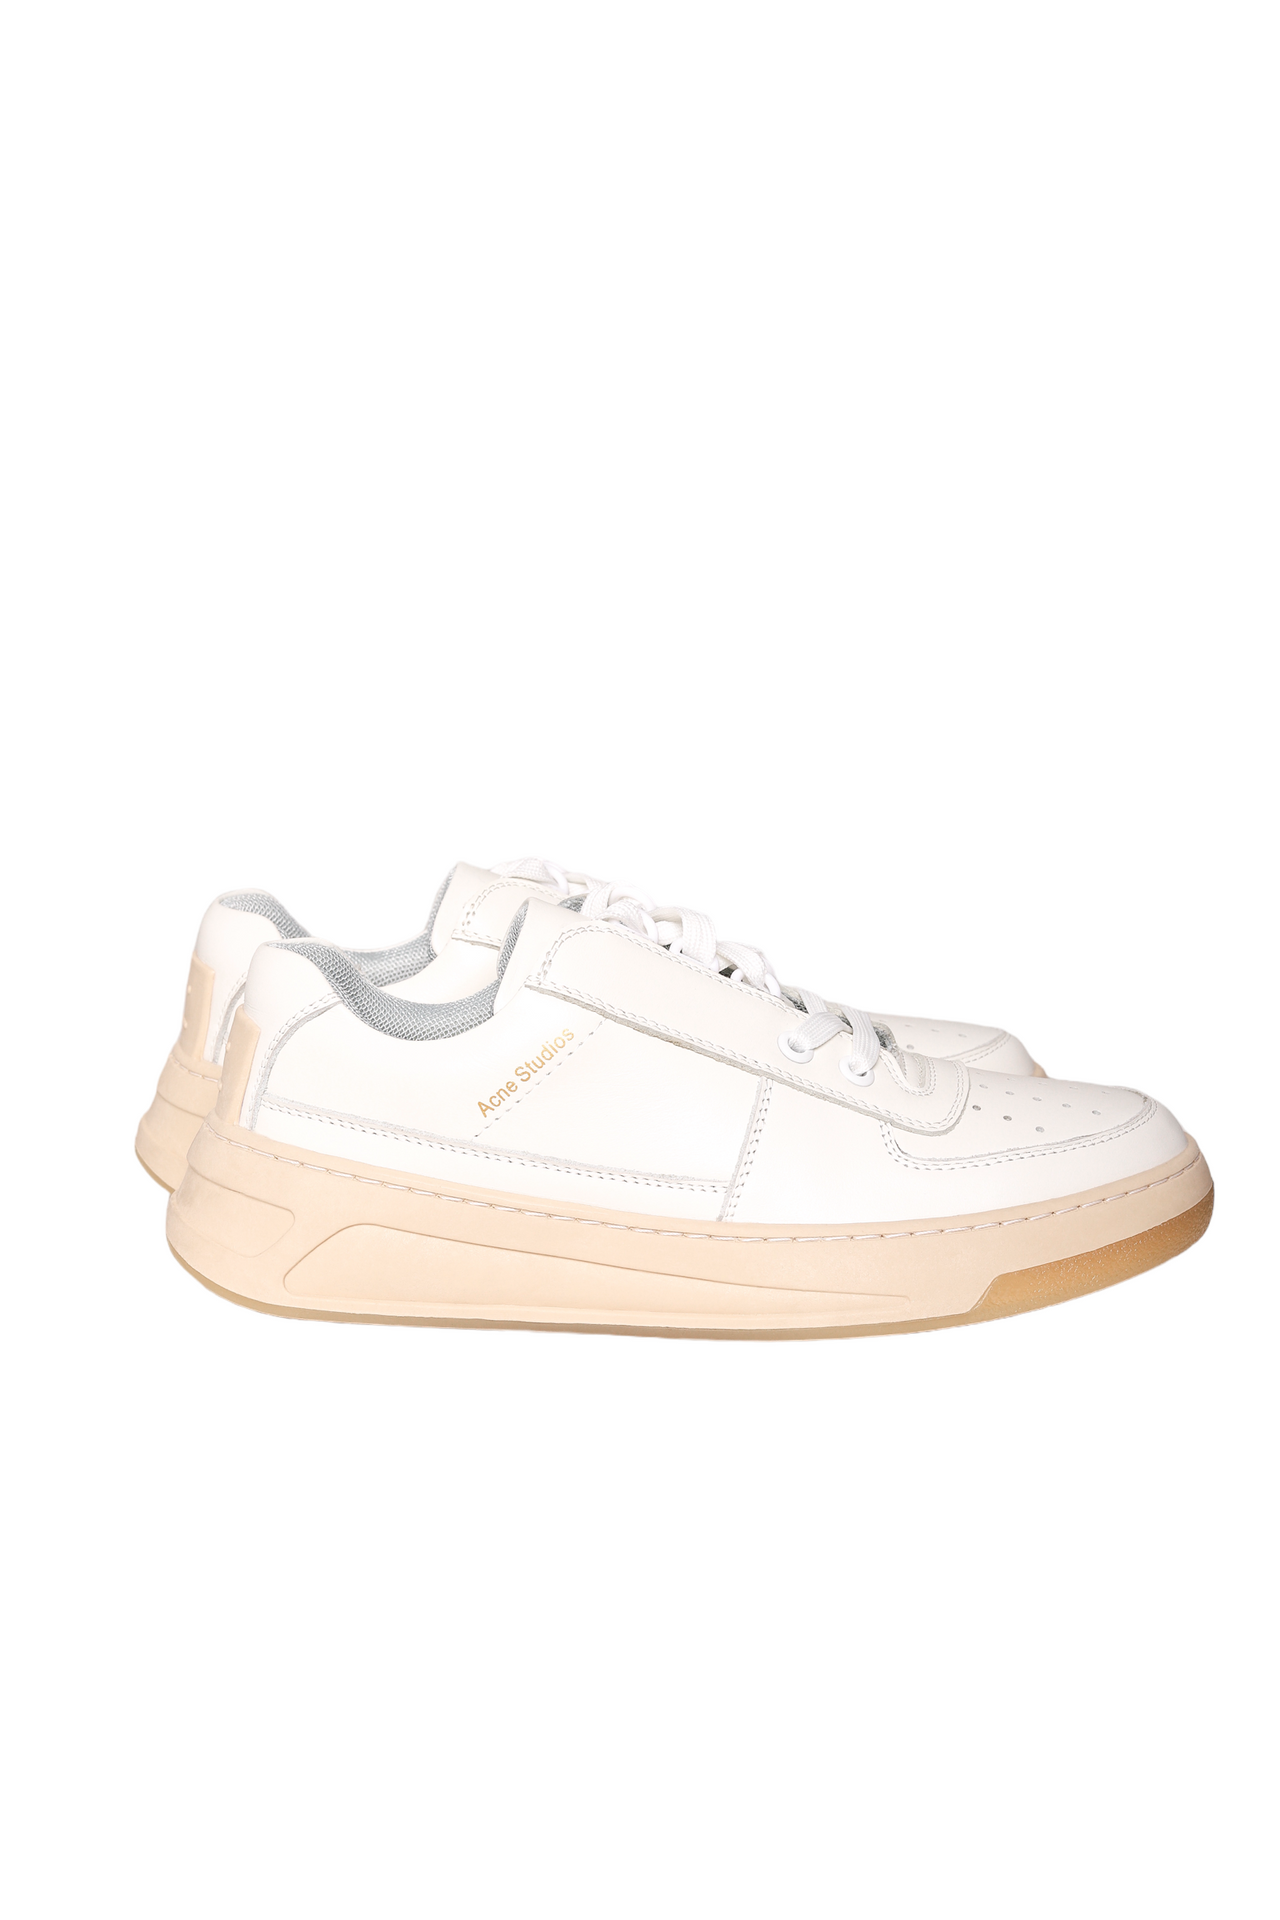 Acne Studios Perey Lace Up Sneaker White